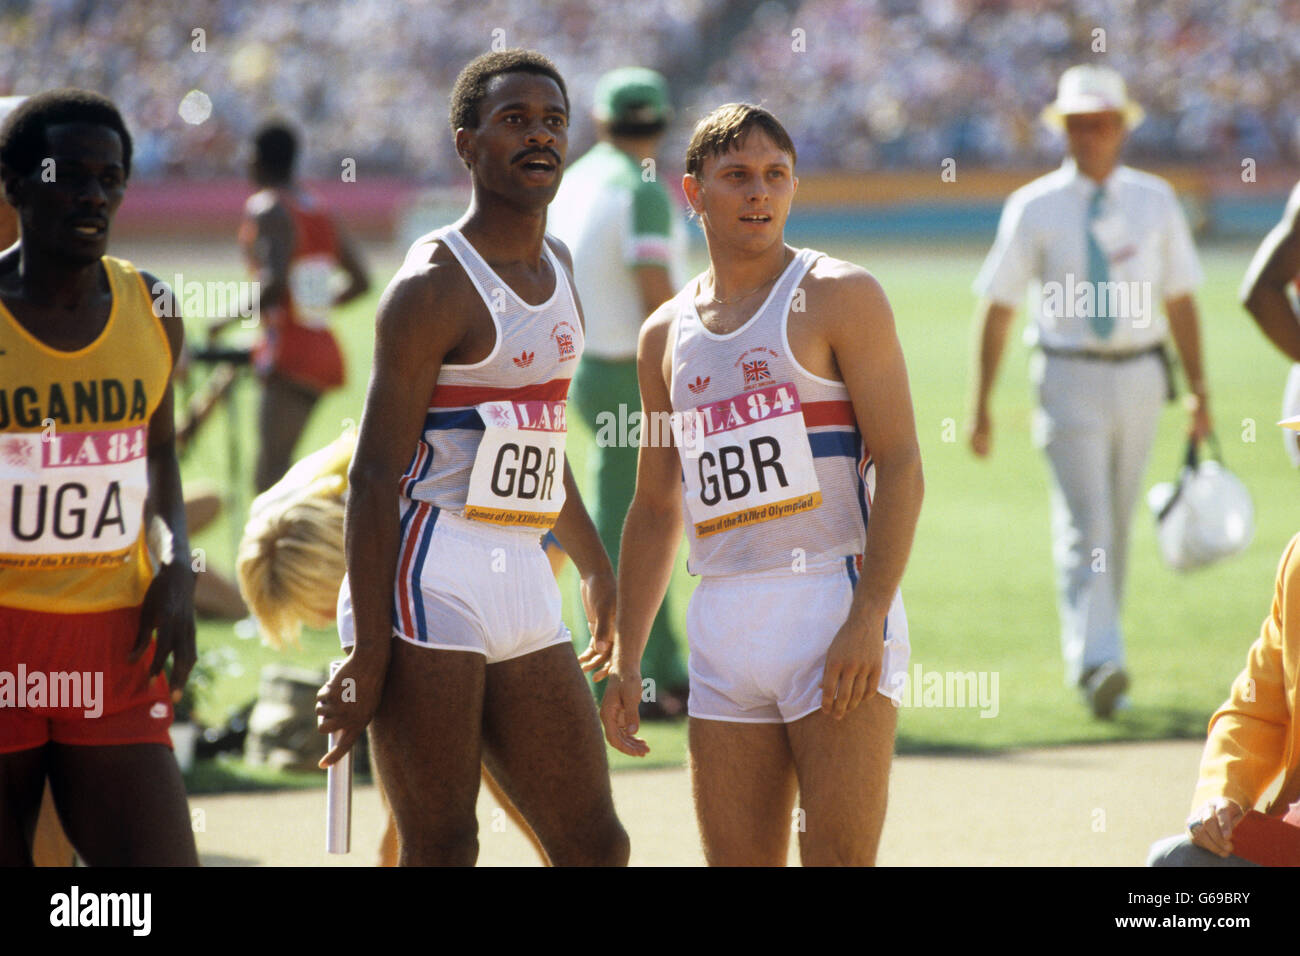 Athletics - Los Angeles Olympic Games 1984 - Men's 4 x 400m Relay. Great Britain's Phil Brown (l) and Todd Bennett (r) after winning silver in the Men's 4 x 400m relay at the Los Angeles Olympics. Stock Photo